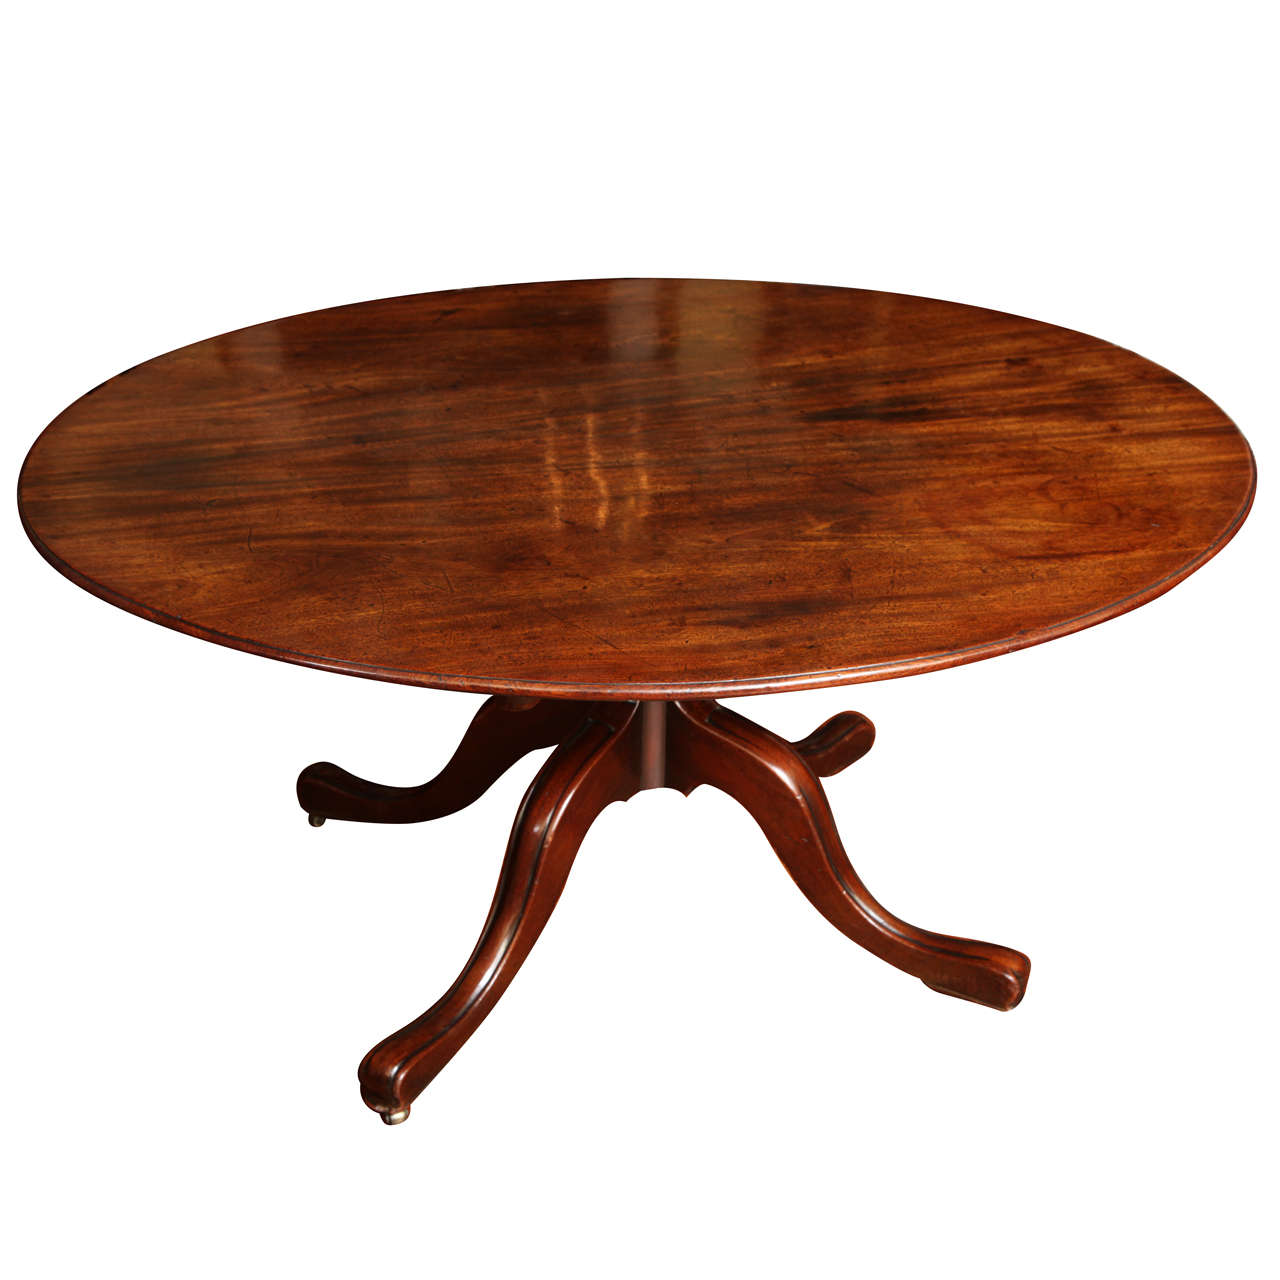 Antique George III Oval Mahogany Breakfast Table, English, circa 1780 For Sale